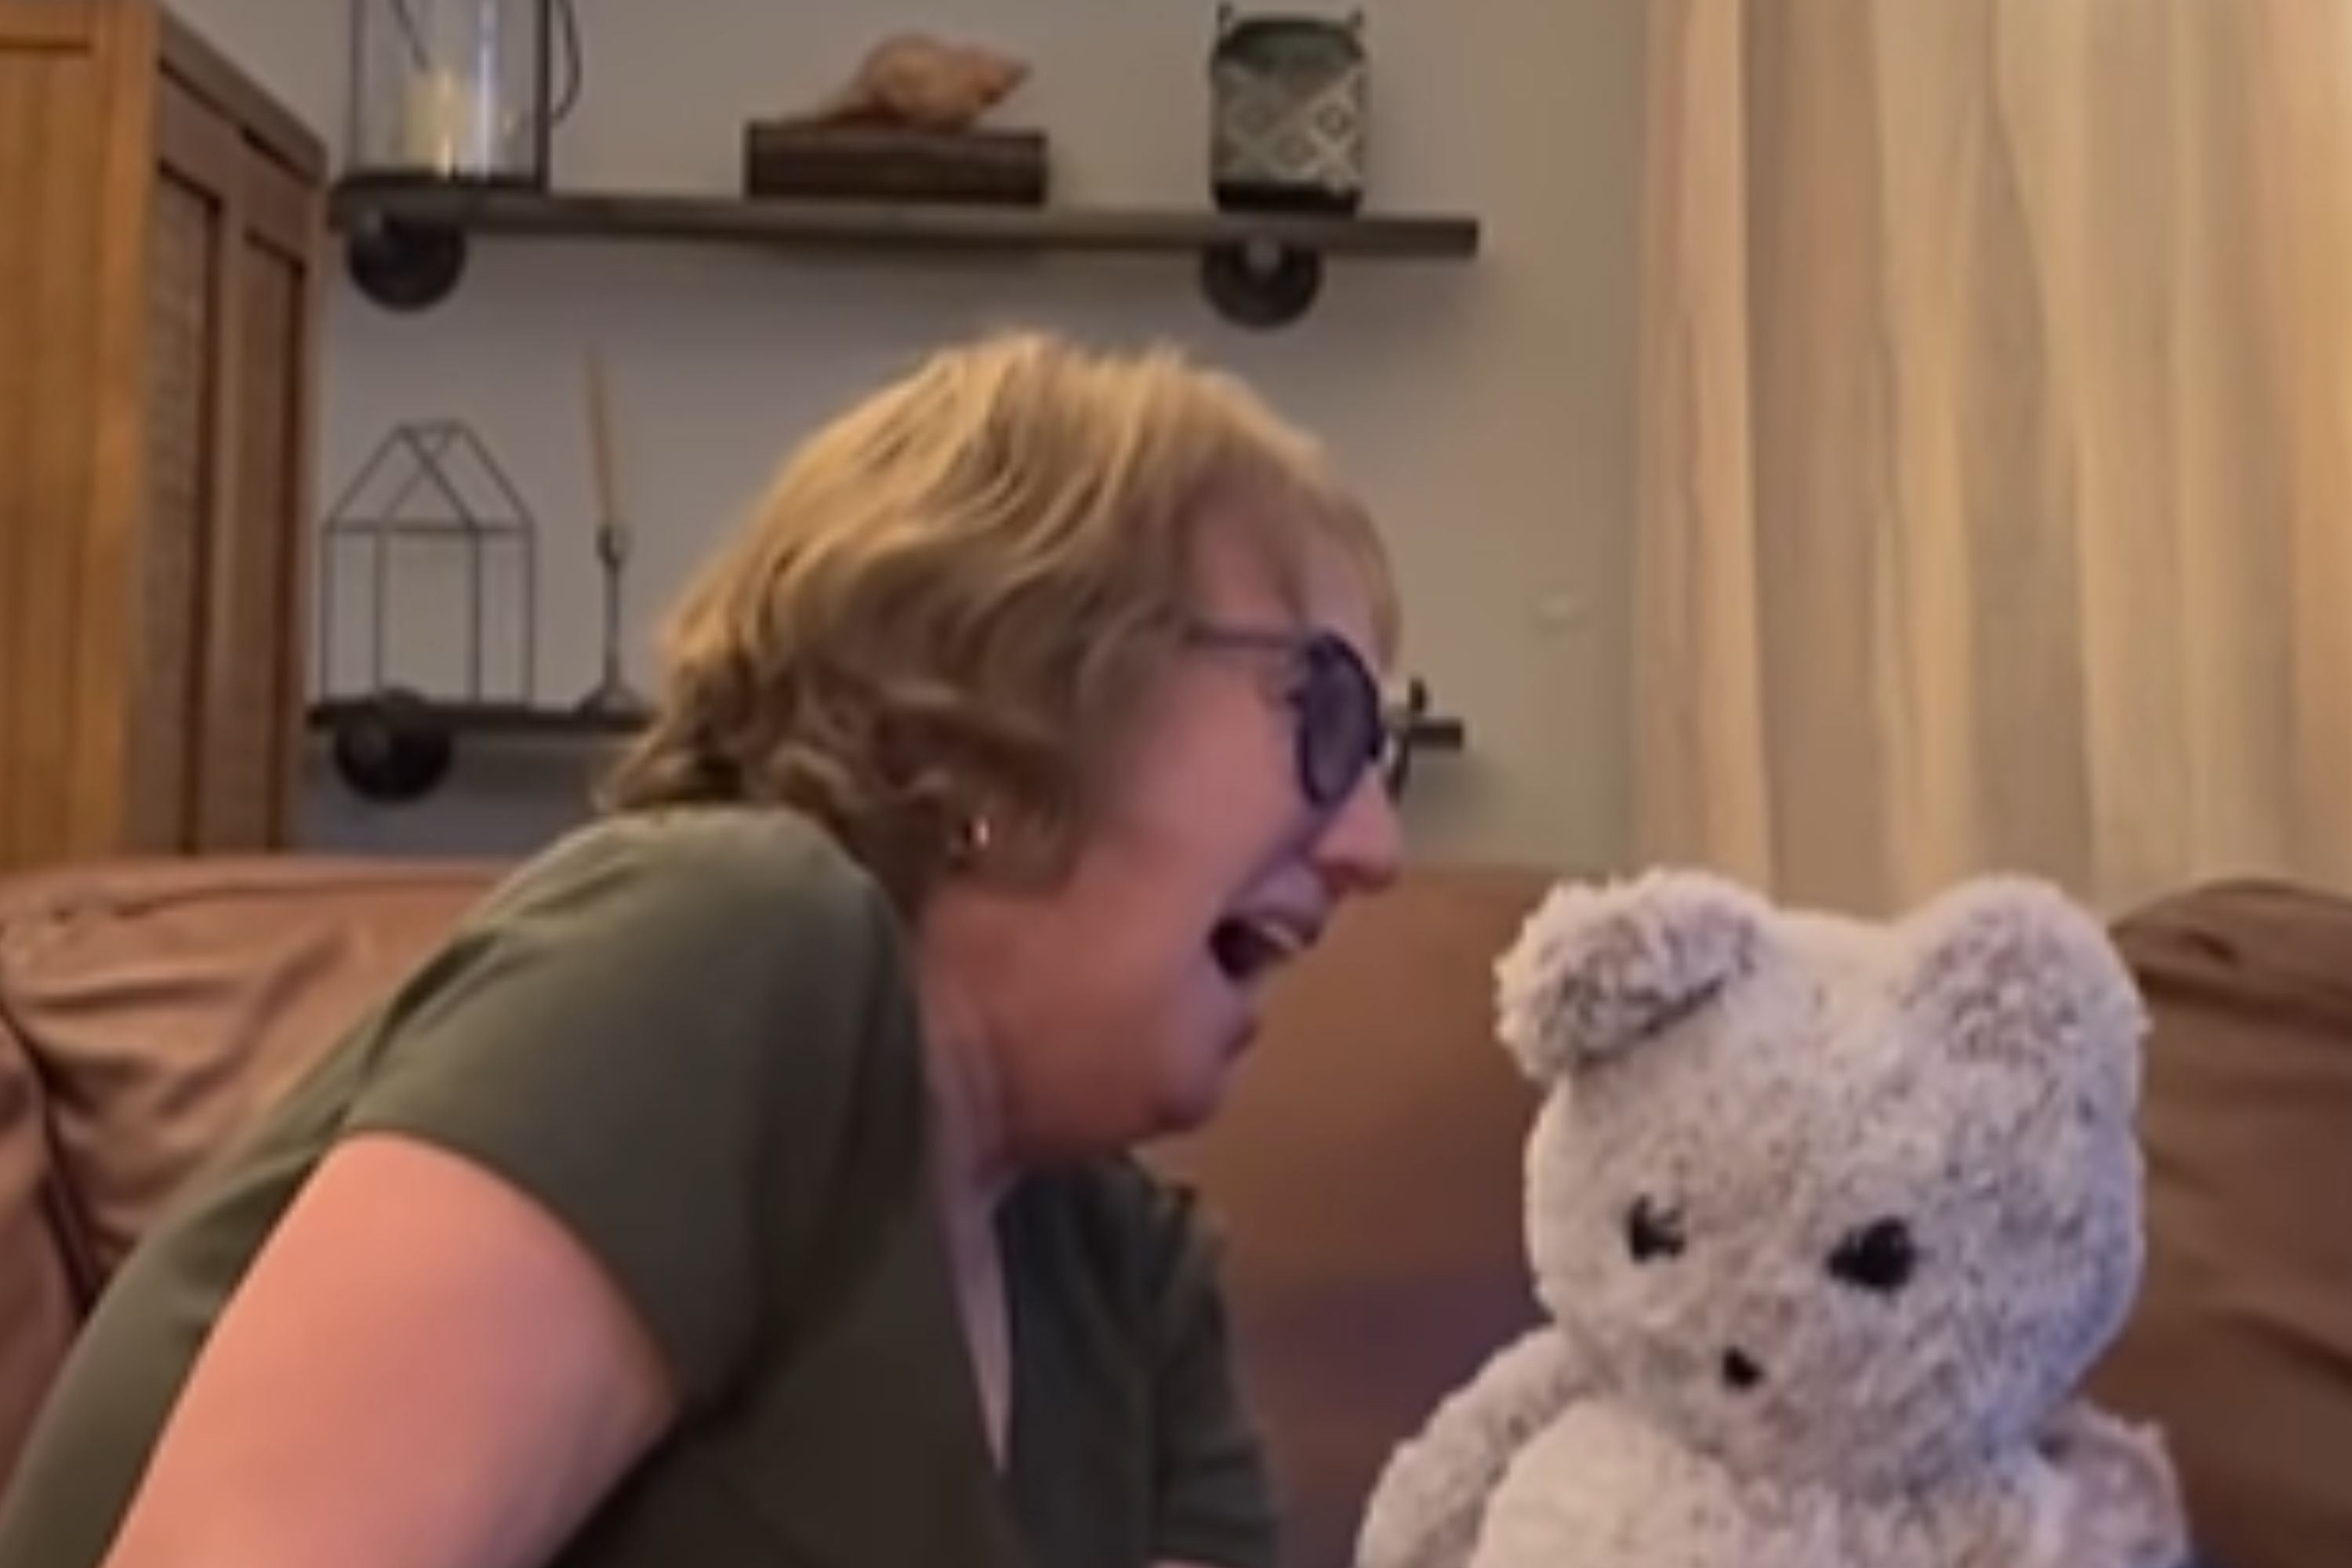 Grandma’s “innocent mistake” while sewing teddy leaves everyone in stitches